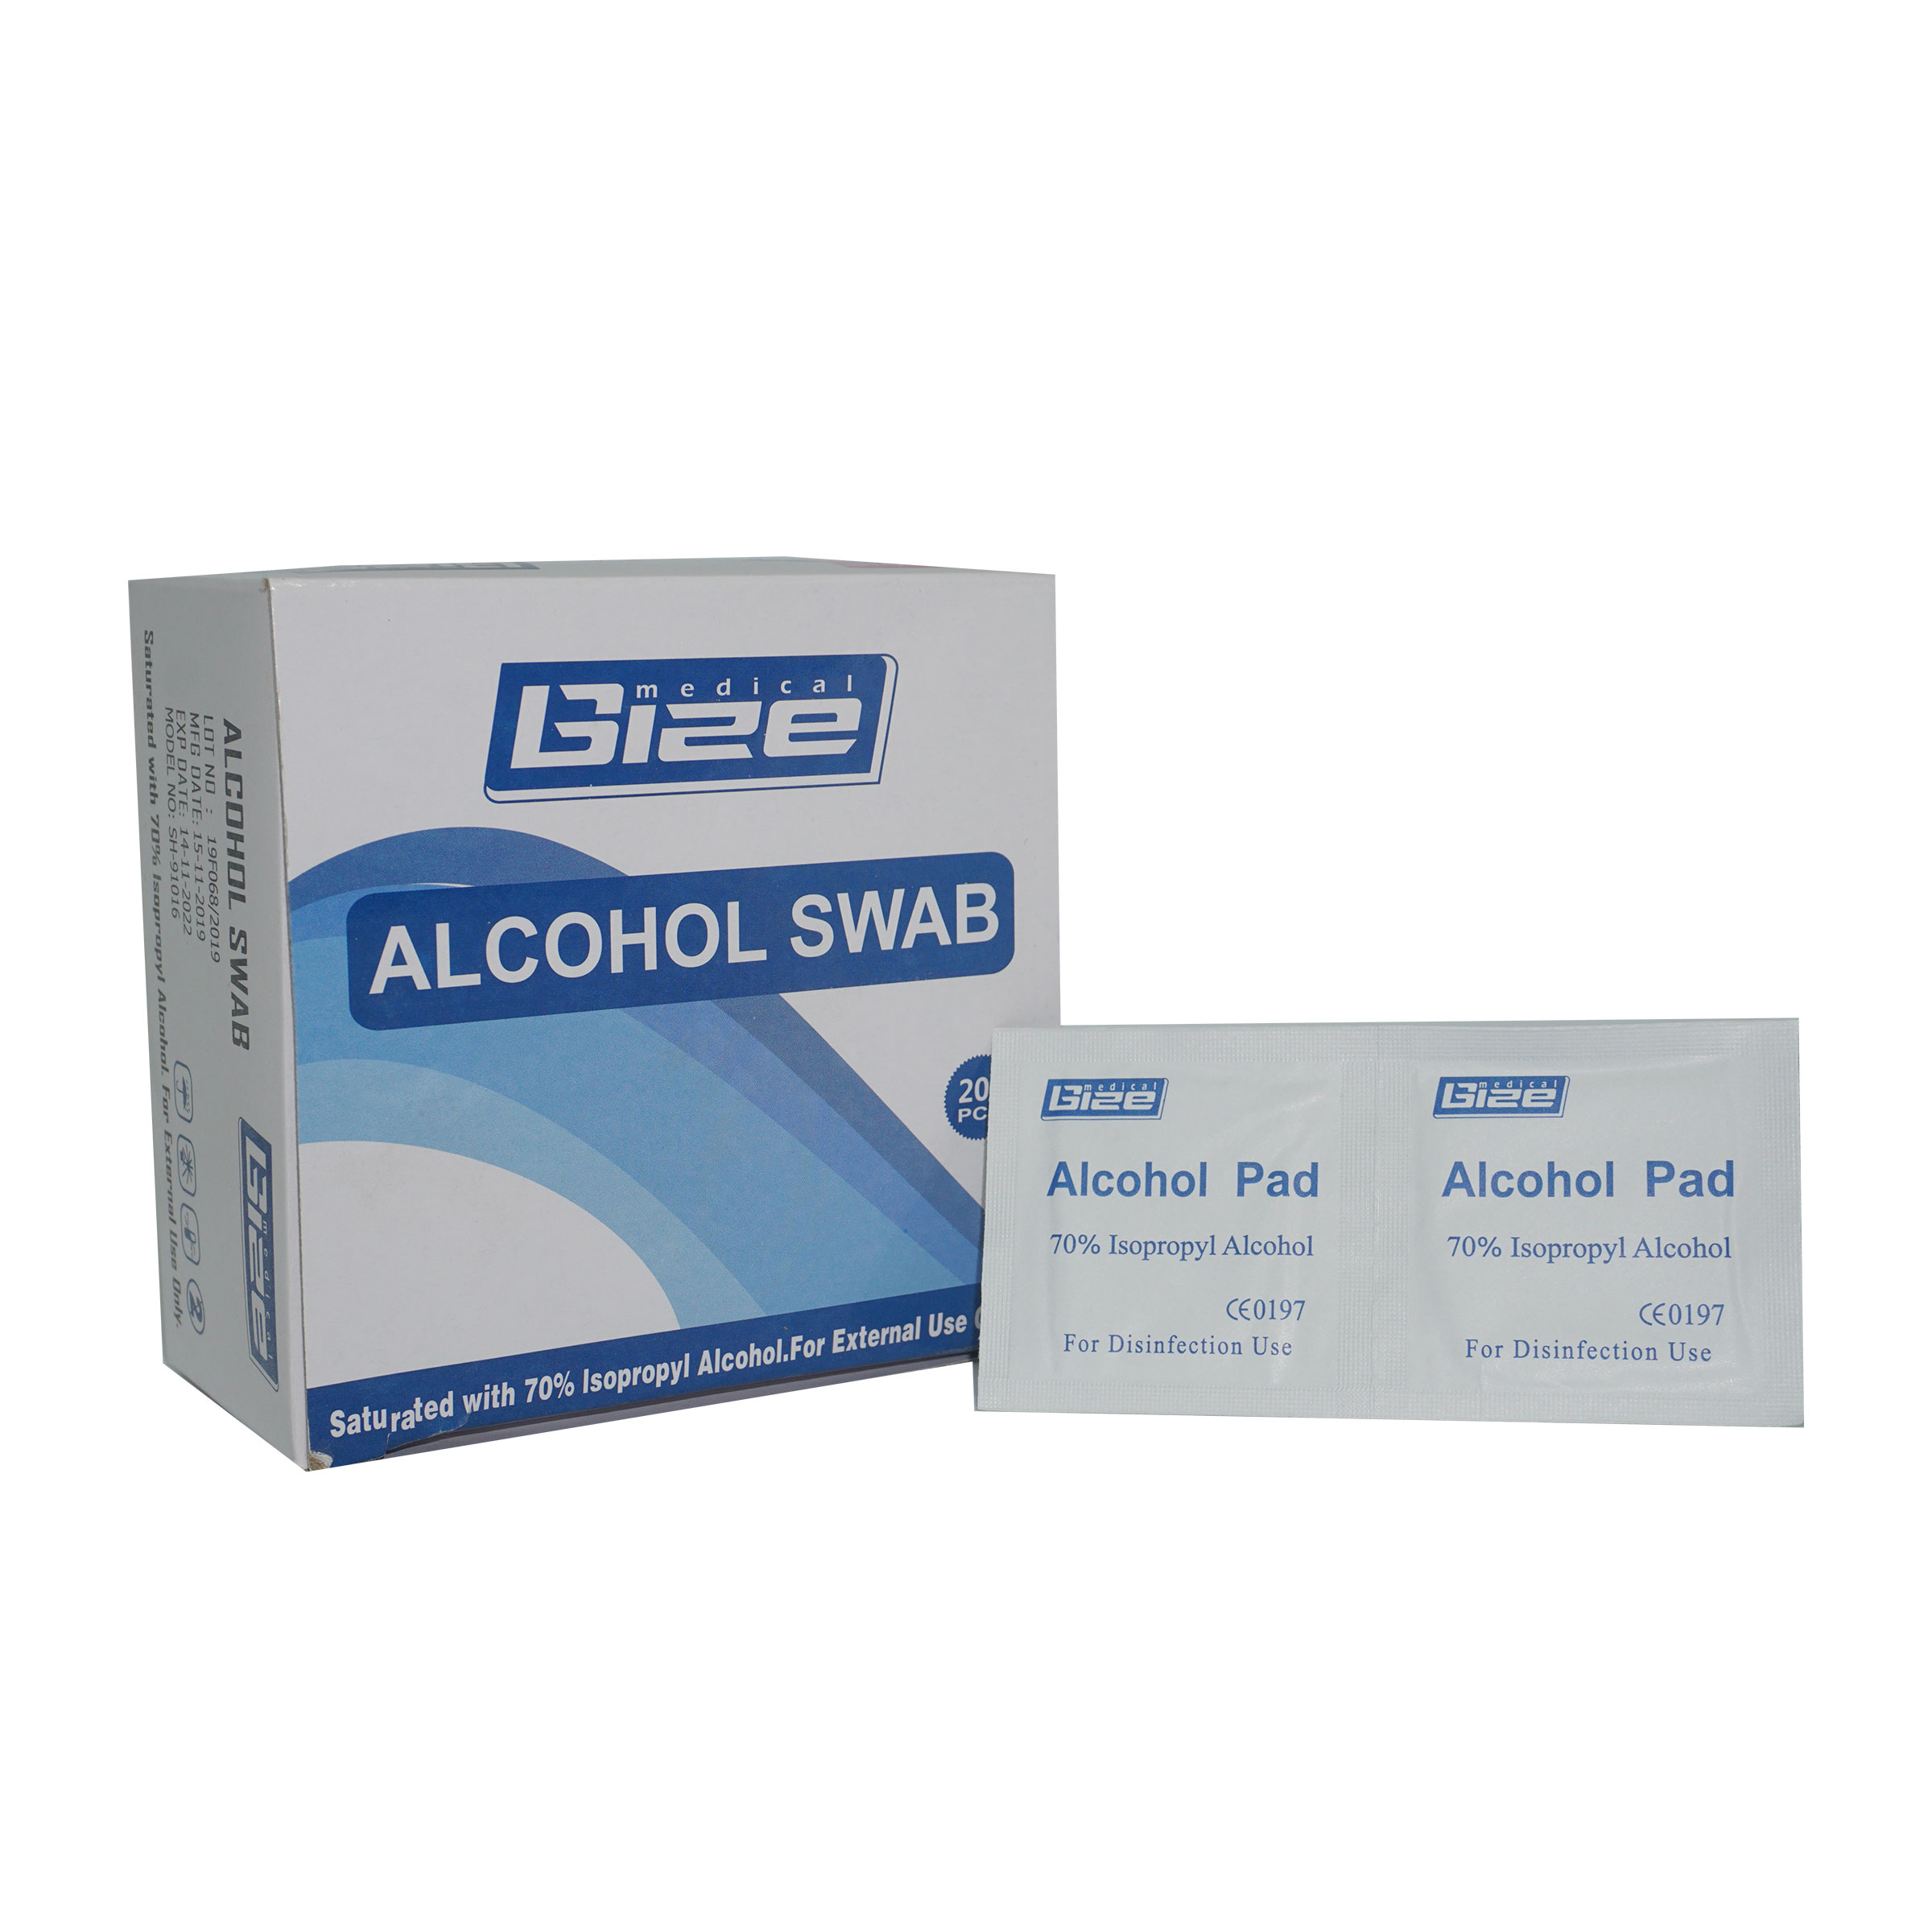 Alcohol Swabs - Lrd Available at Online Family Pharmacy Qatar Doha